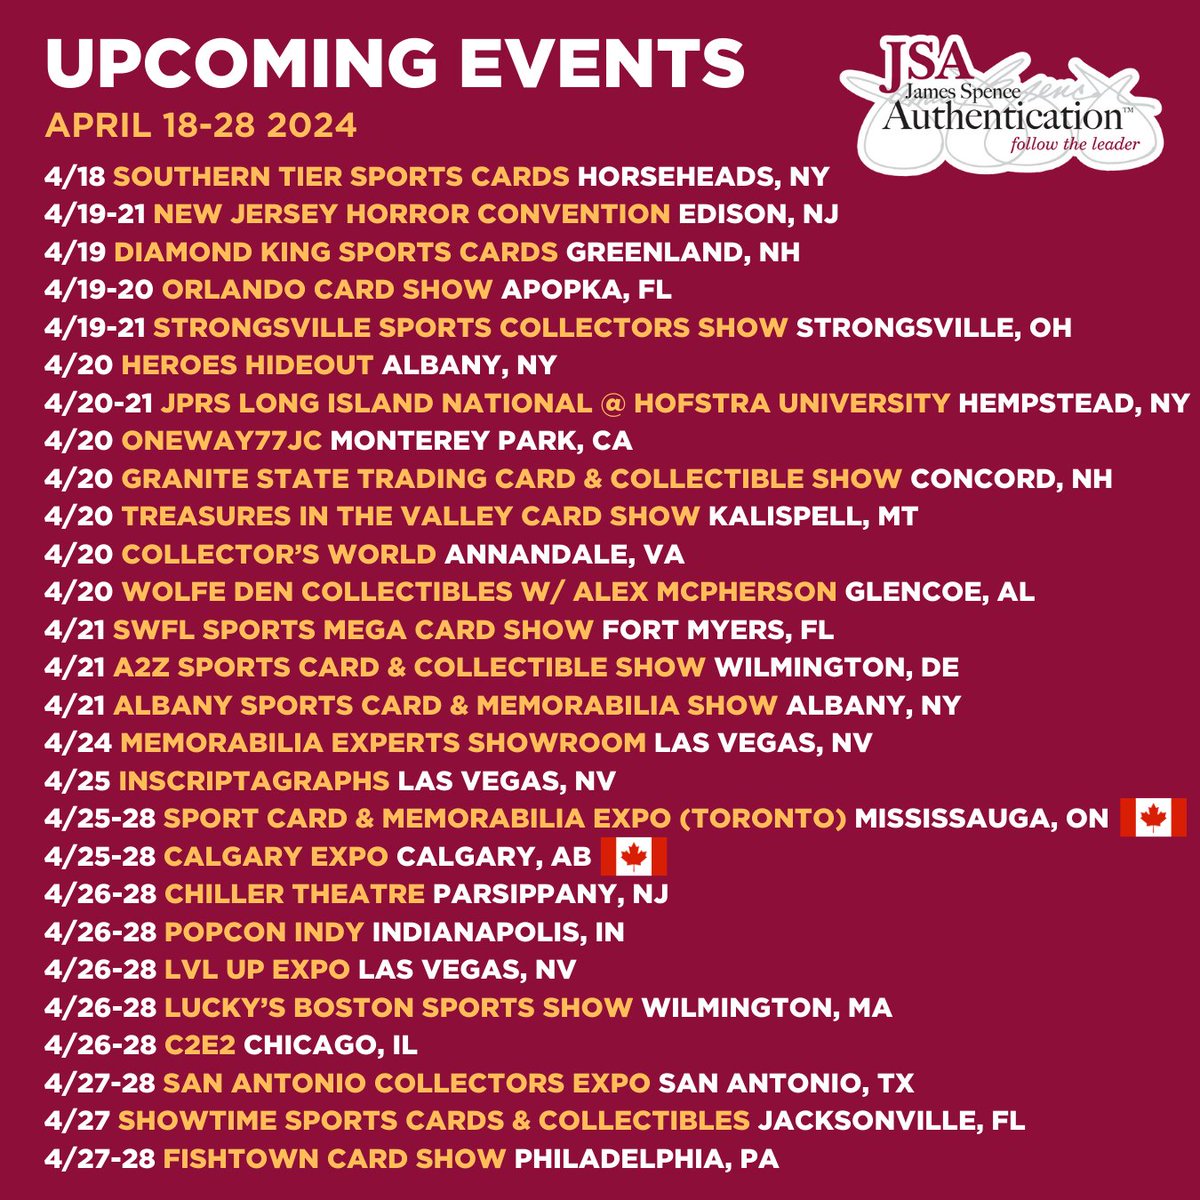 JSA lineup of upcoming appearances April 18-28 2024 🗓️
Authenticate autographs signed at the show or previously signed items brought from home (unless noted otherwise.)

Visit SpenceLOA.com/events for more on-site appearances and information.

#jsaauthenticated #jsa